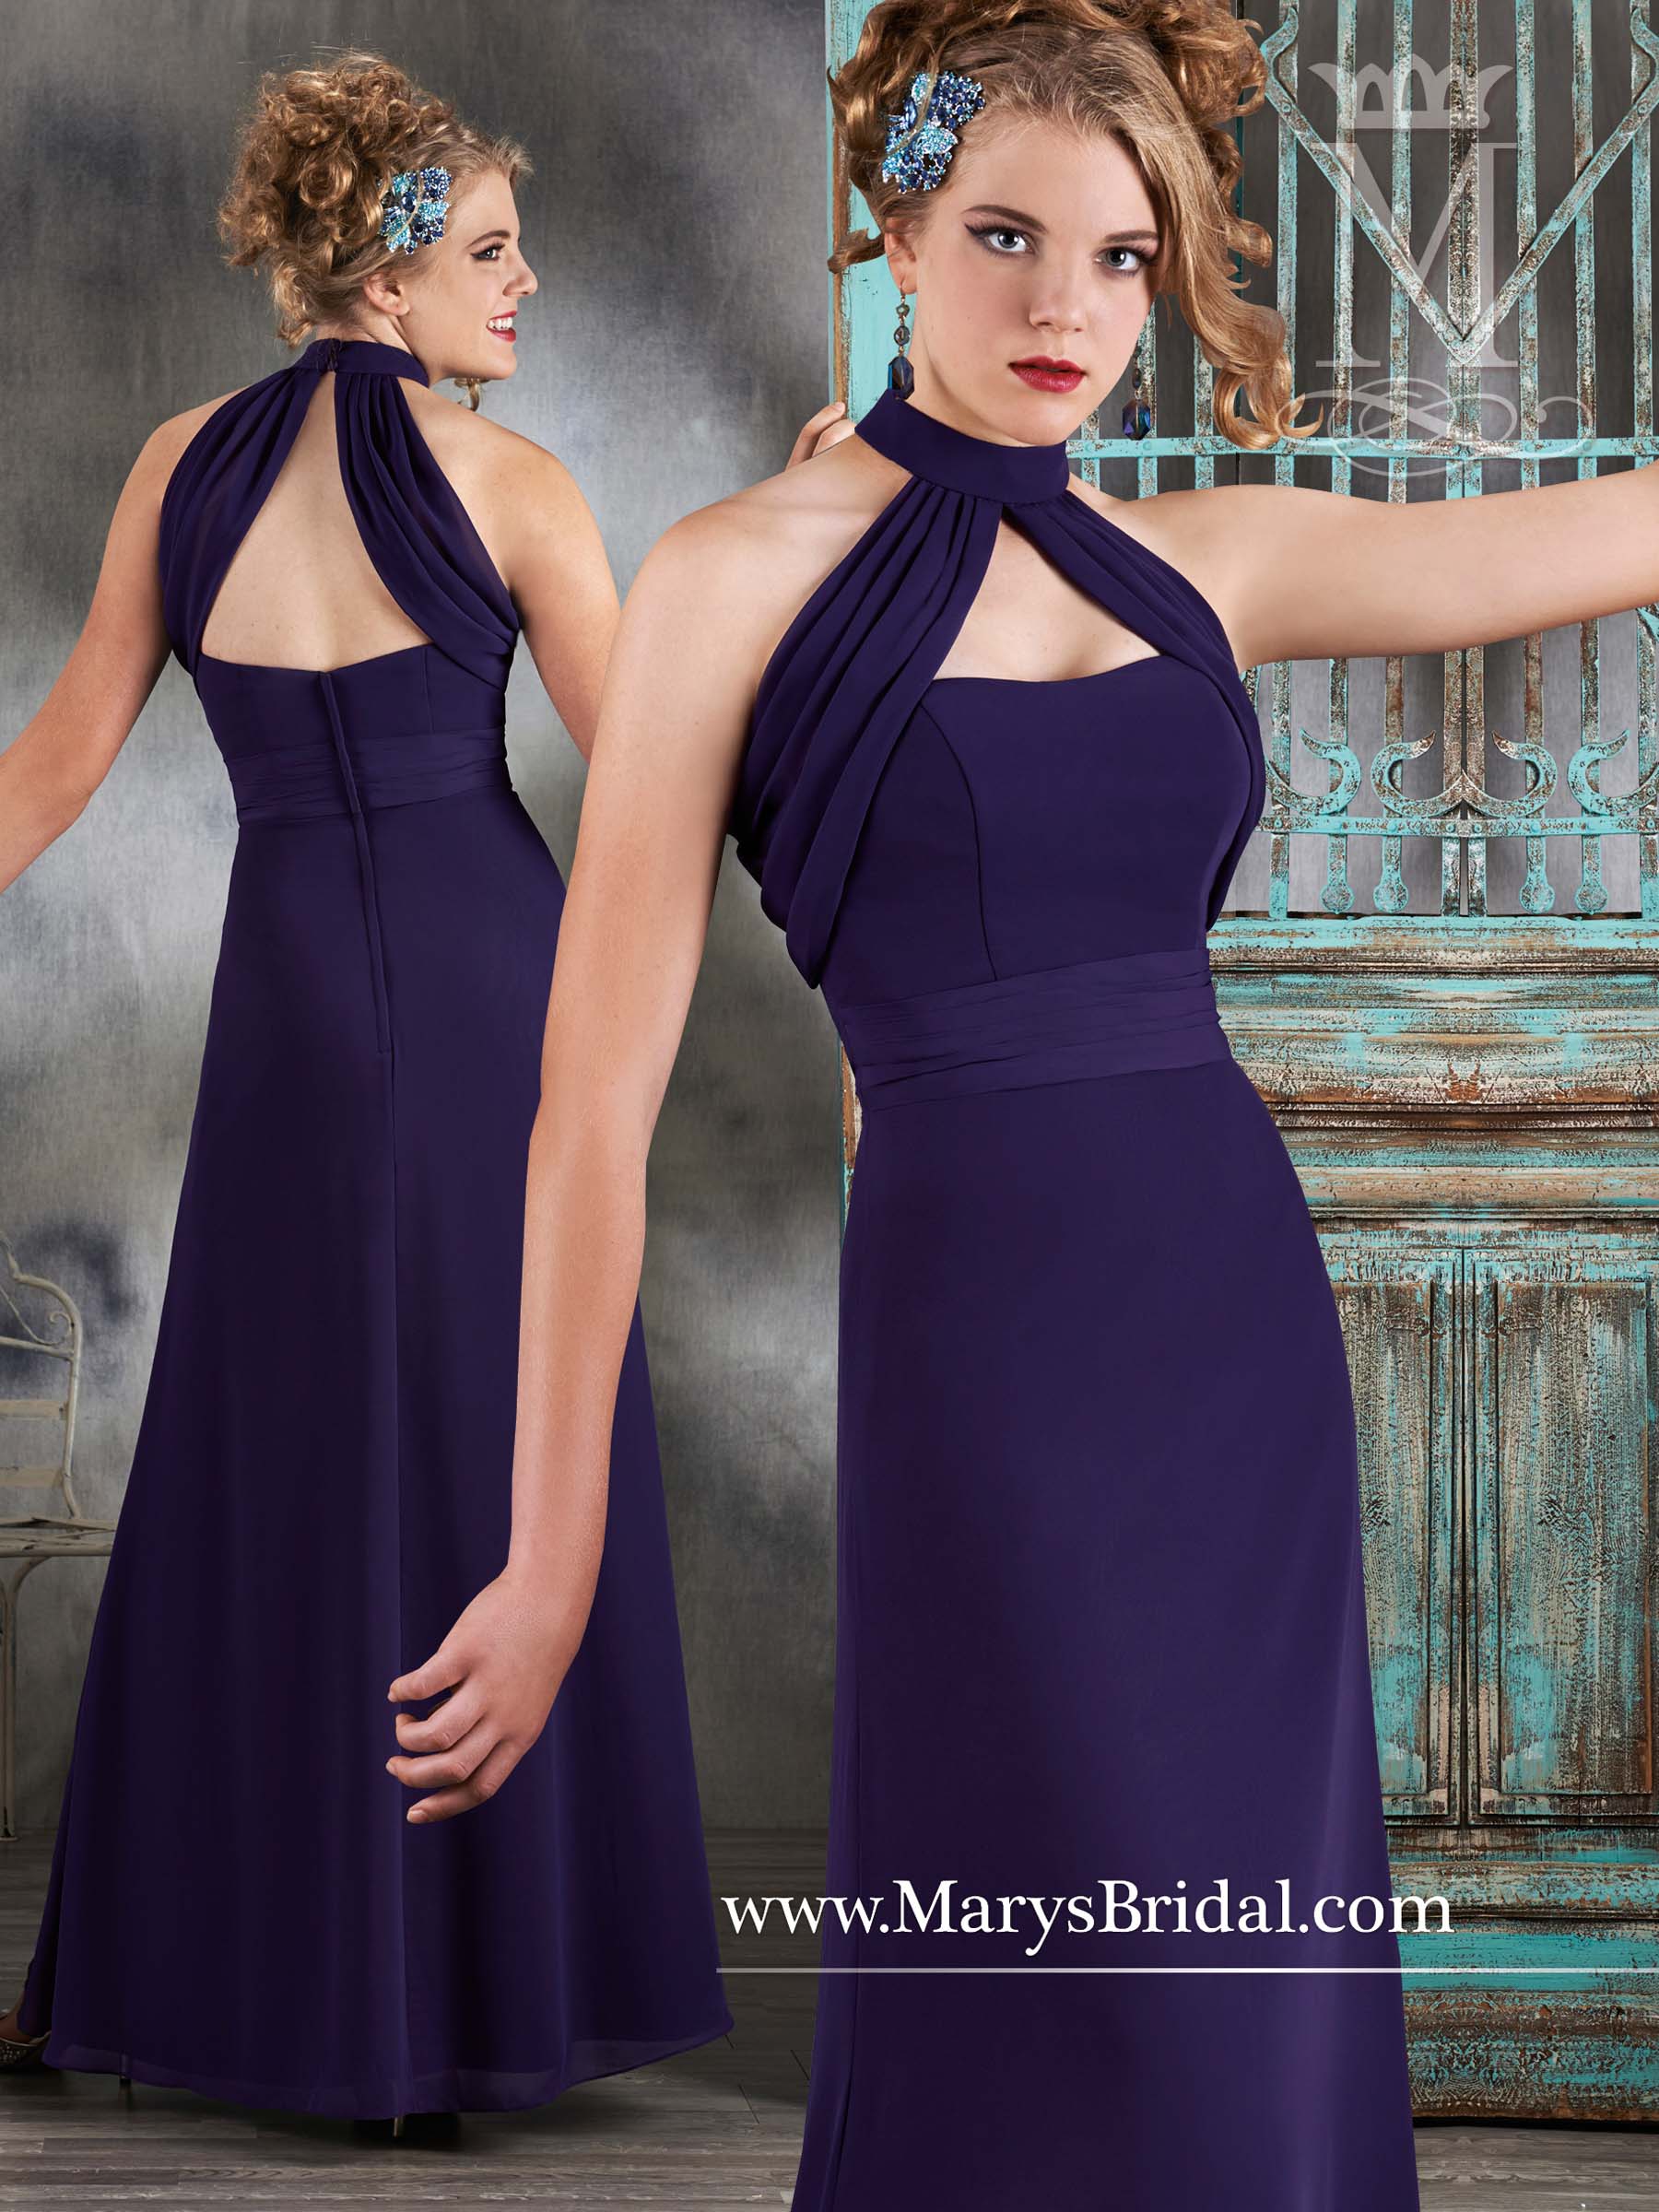 Chiffon A-line bridesmaid gown featuring high neck with detachable neckline to make the gown strapless, ruched waist, and back zipper.

Color: Shown in Indigo. Available in 49 colors.
Sizes: 2-30
Fabric: Chiffon